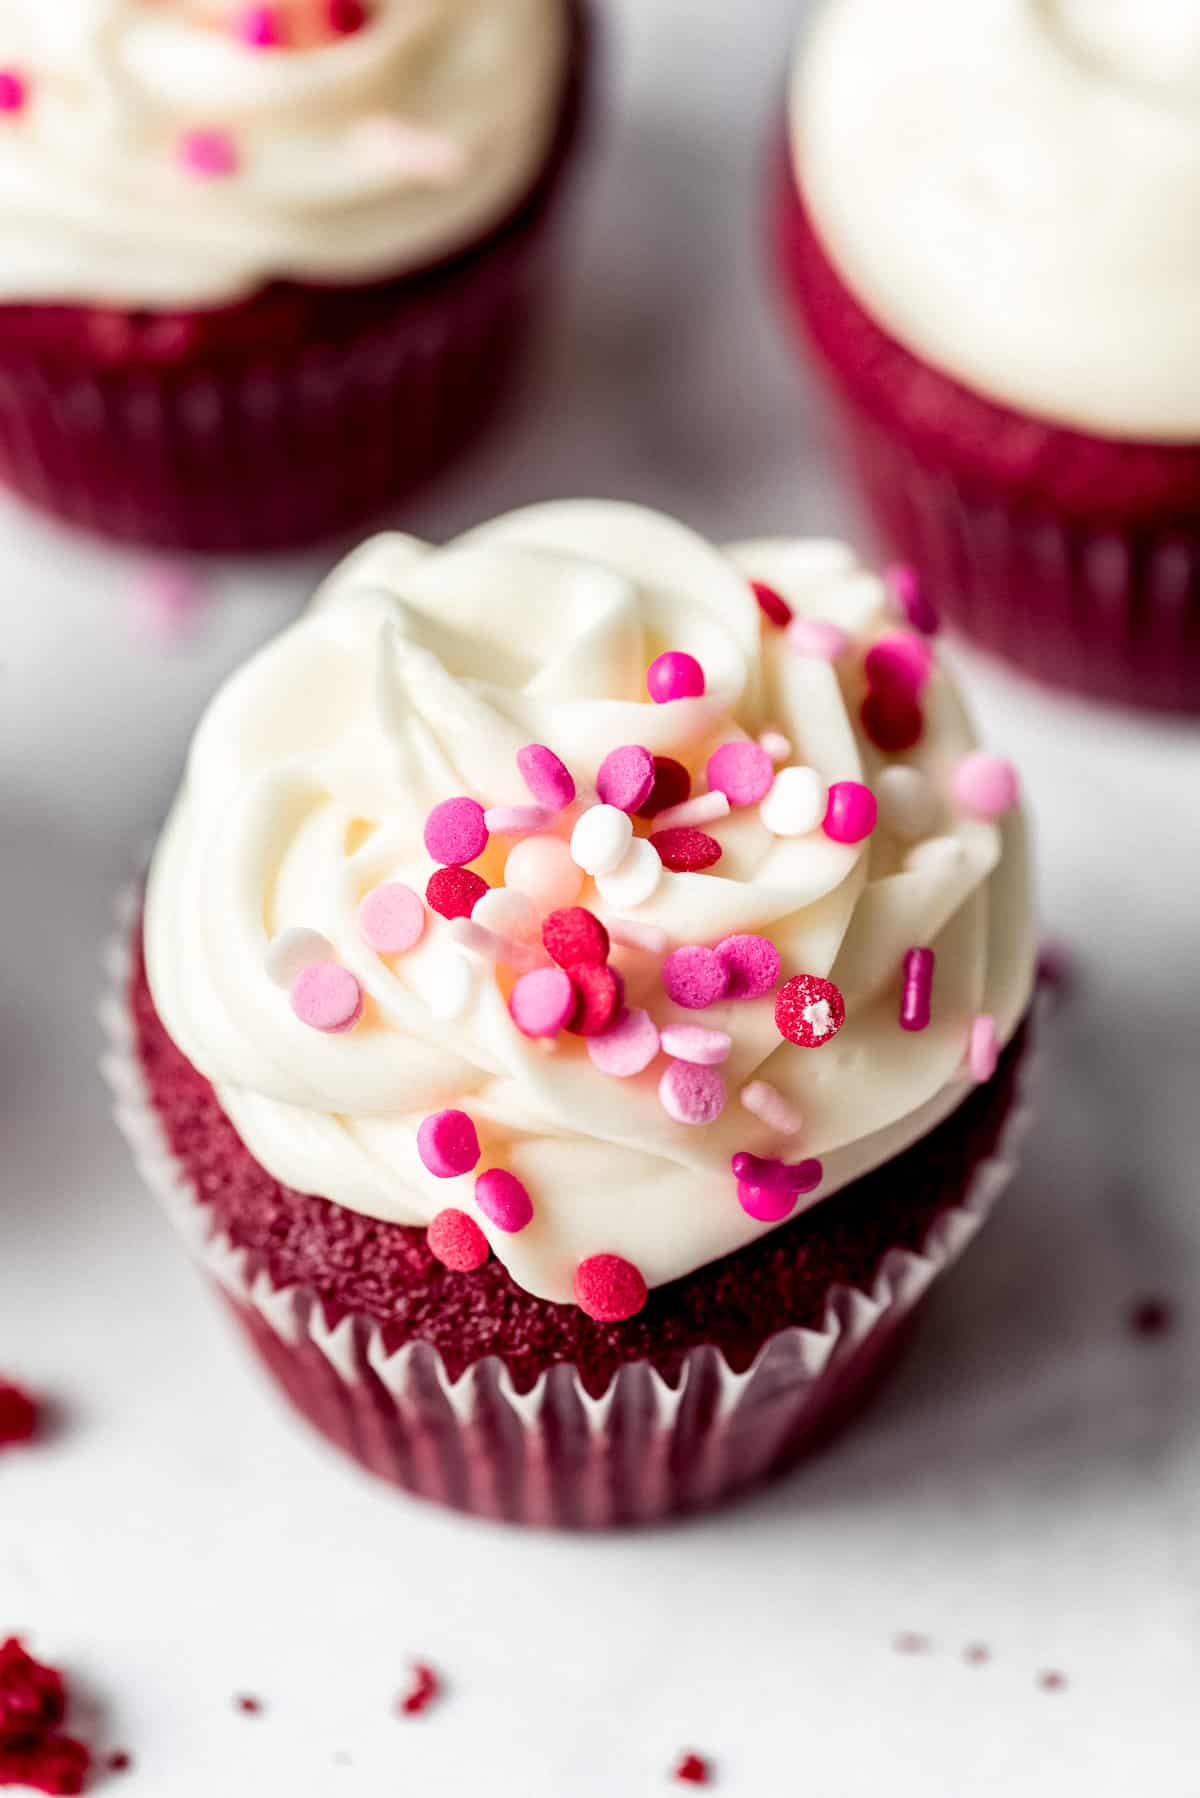 Red velvet cupcake with frosting and pink sprinkles on marble counter.